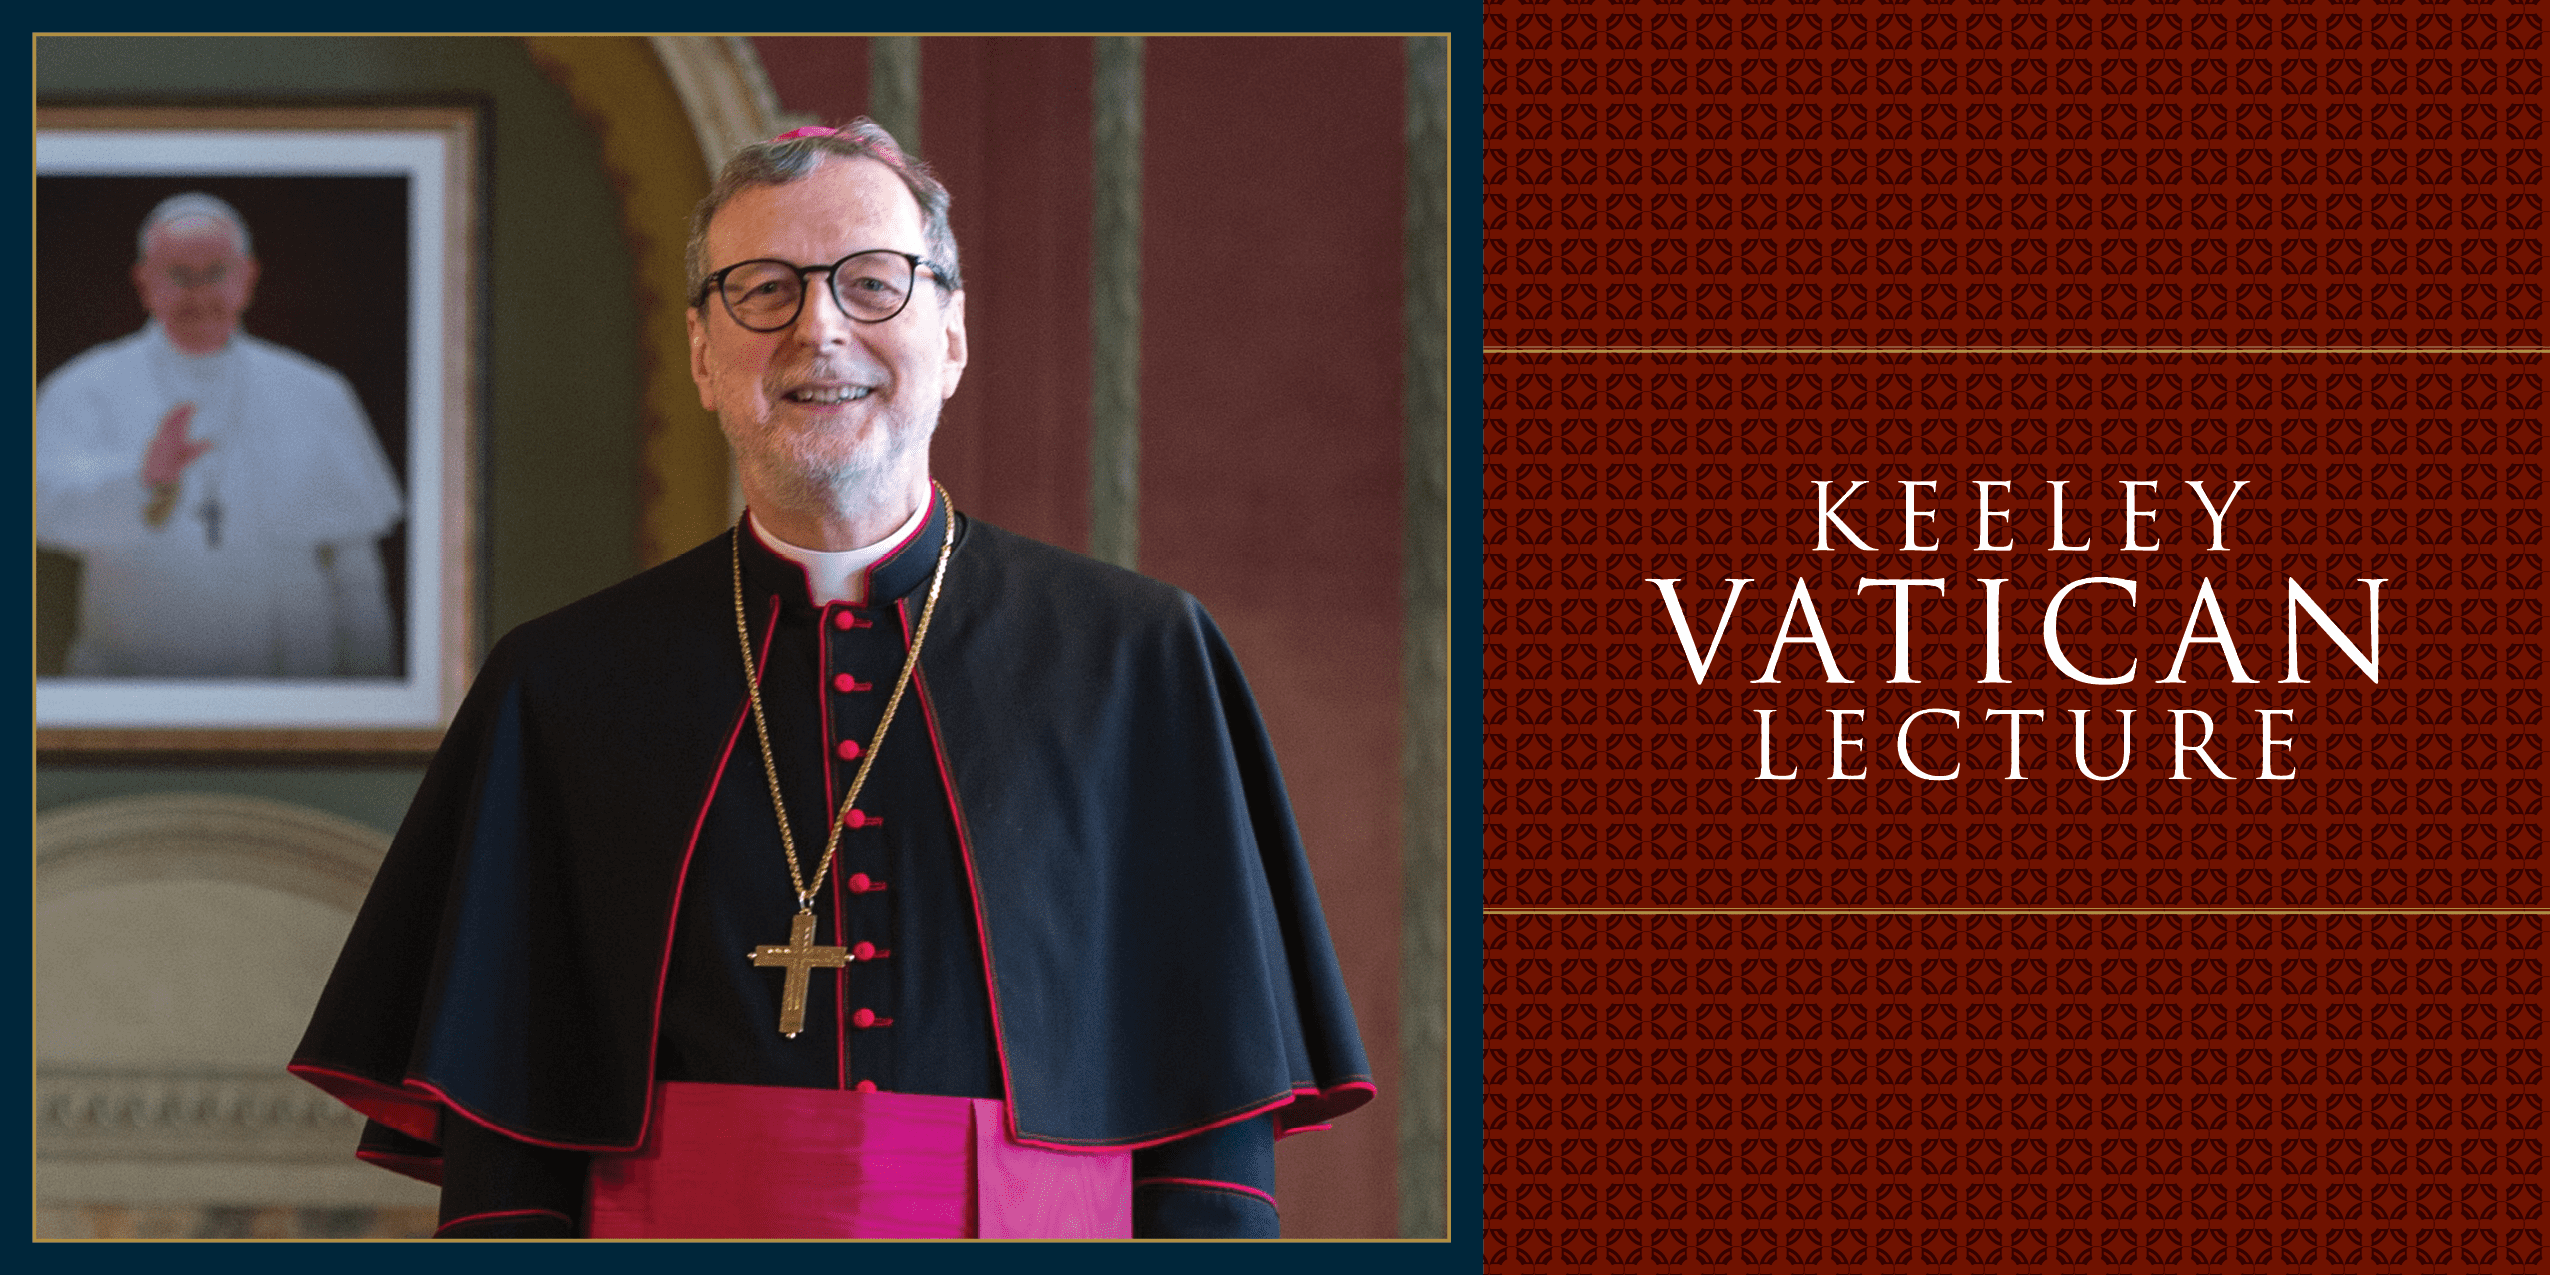 “My Contacts with Saint John Paul II at the Fall of the Soviet Union”: The Keeley Vatican Lecture with Archbishop Claudio Gugerotti